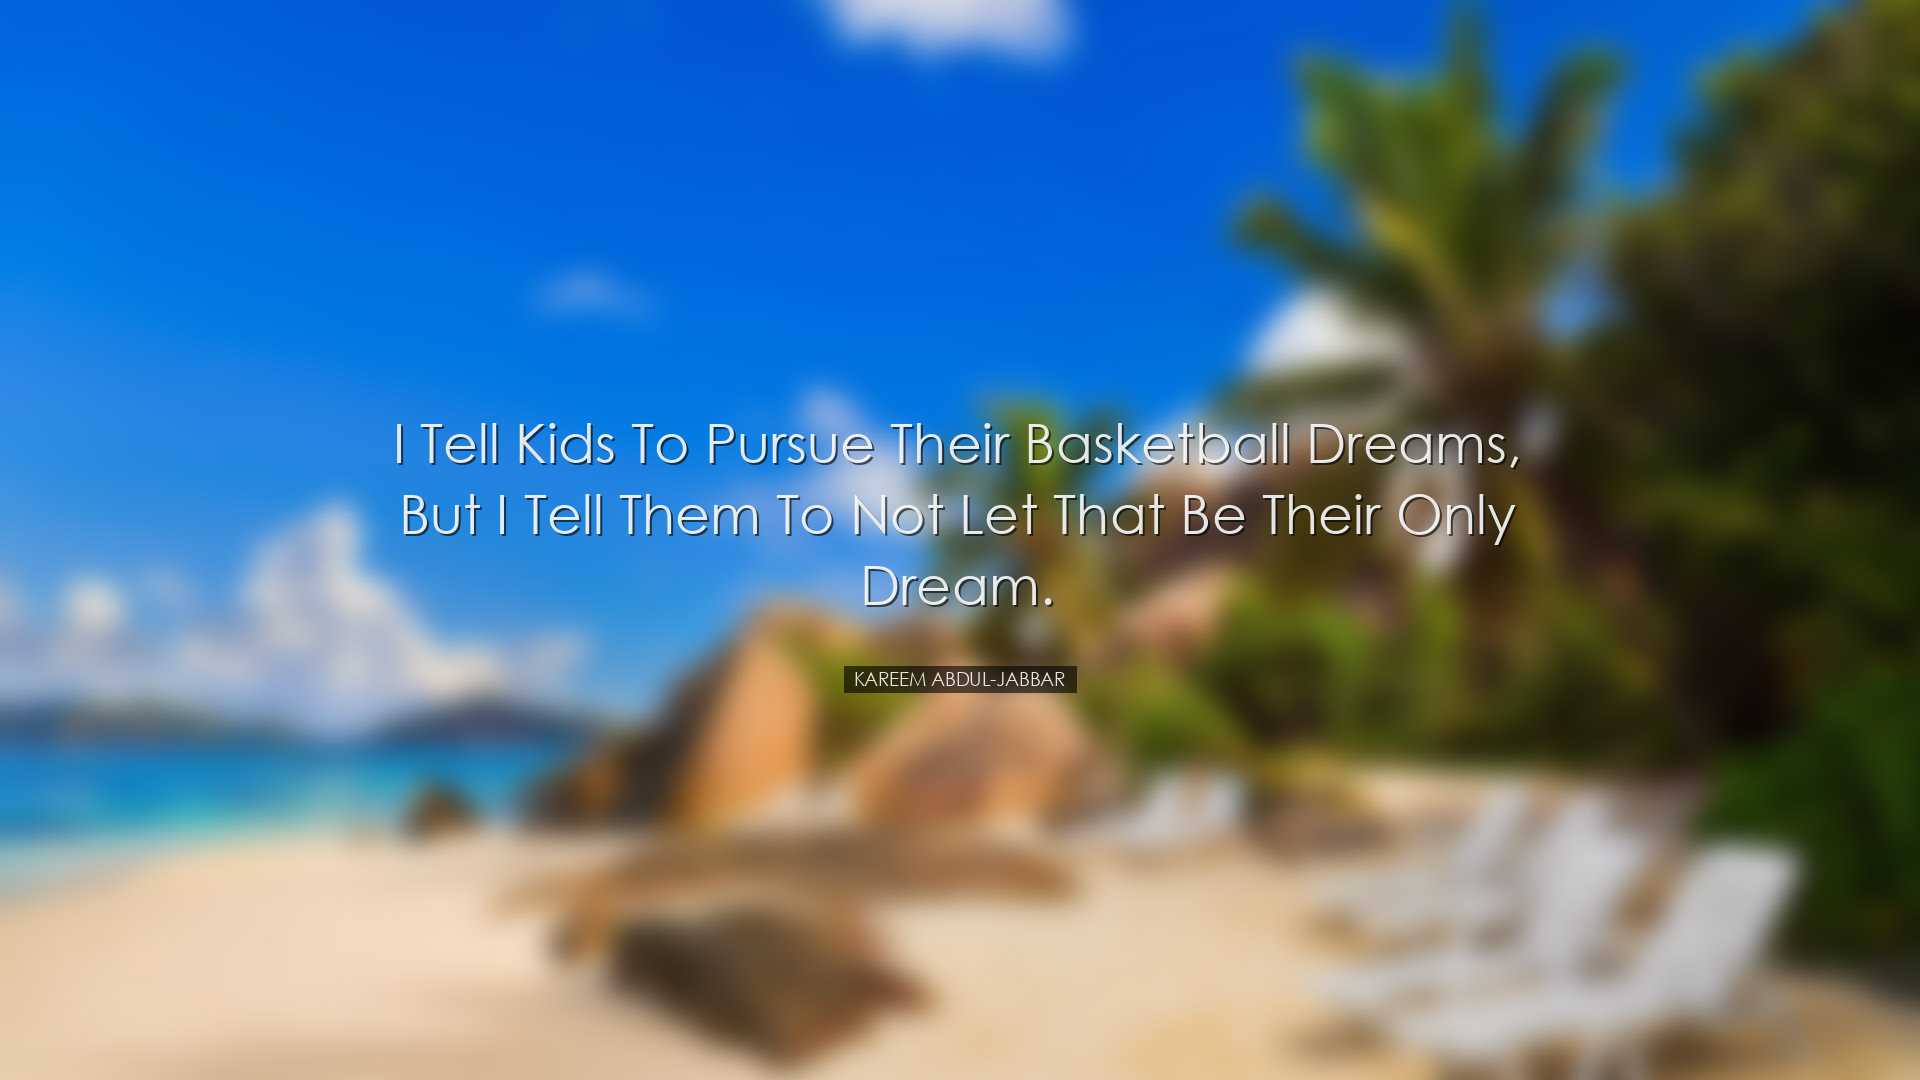 I tell kids to pursue their basketball dreams, but I tell them to